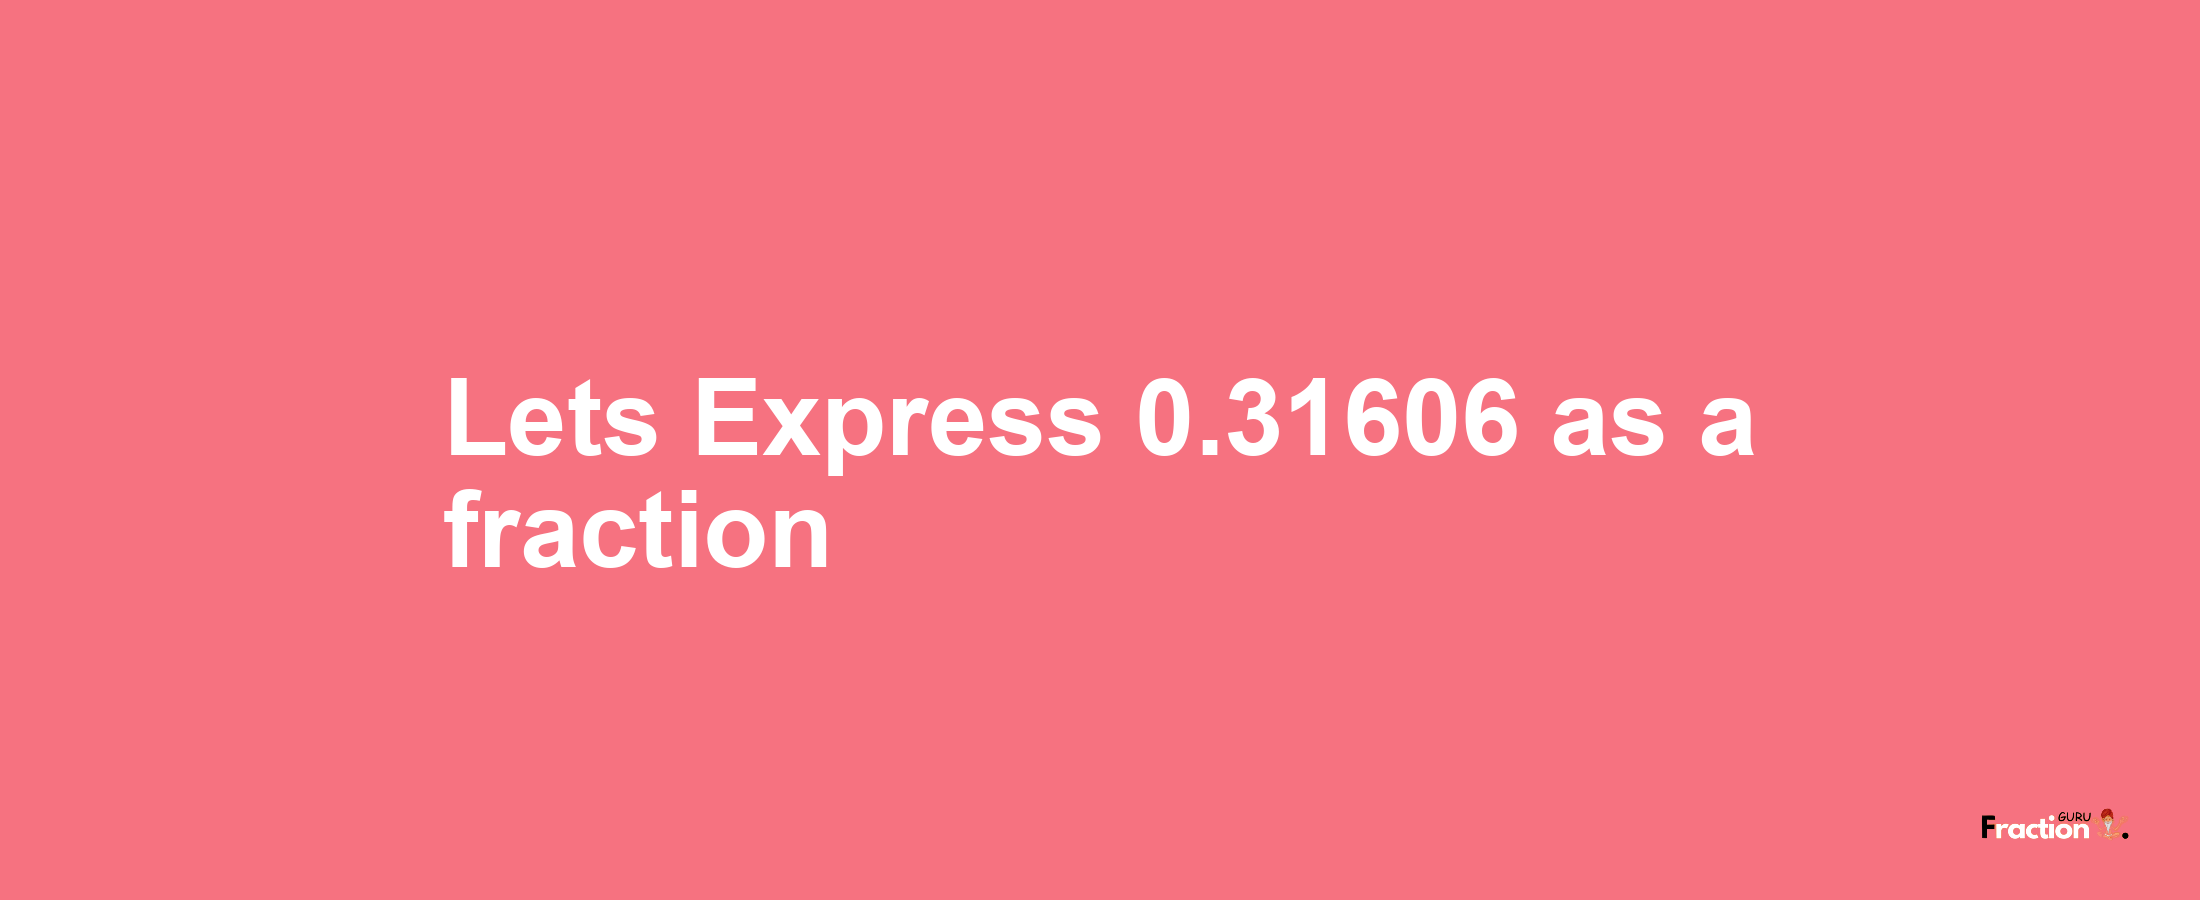 Lets Express 0.31606 as afraction